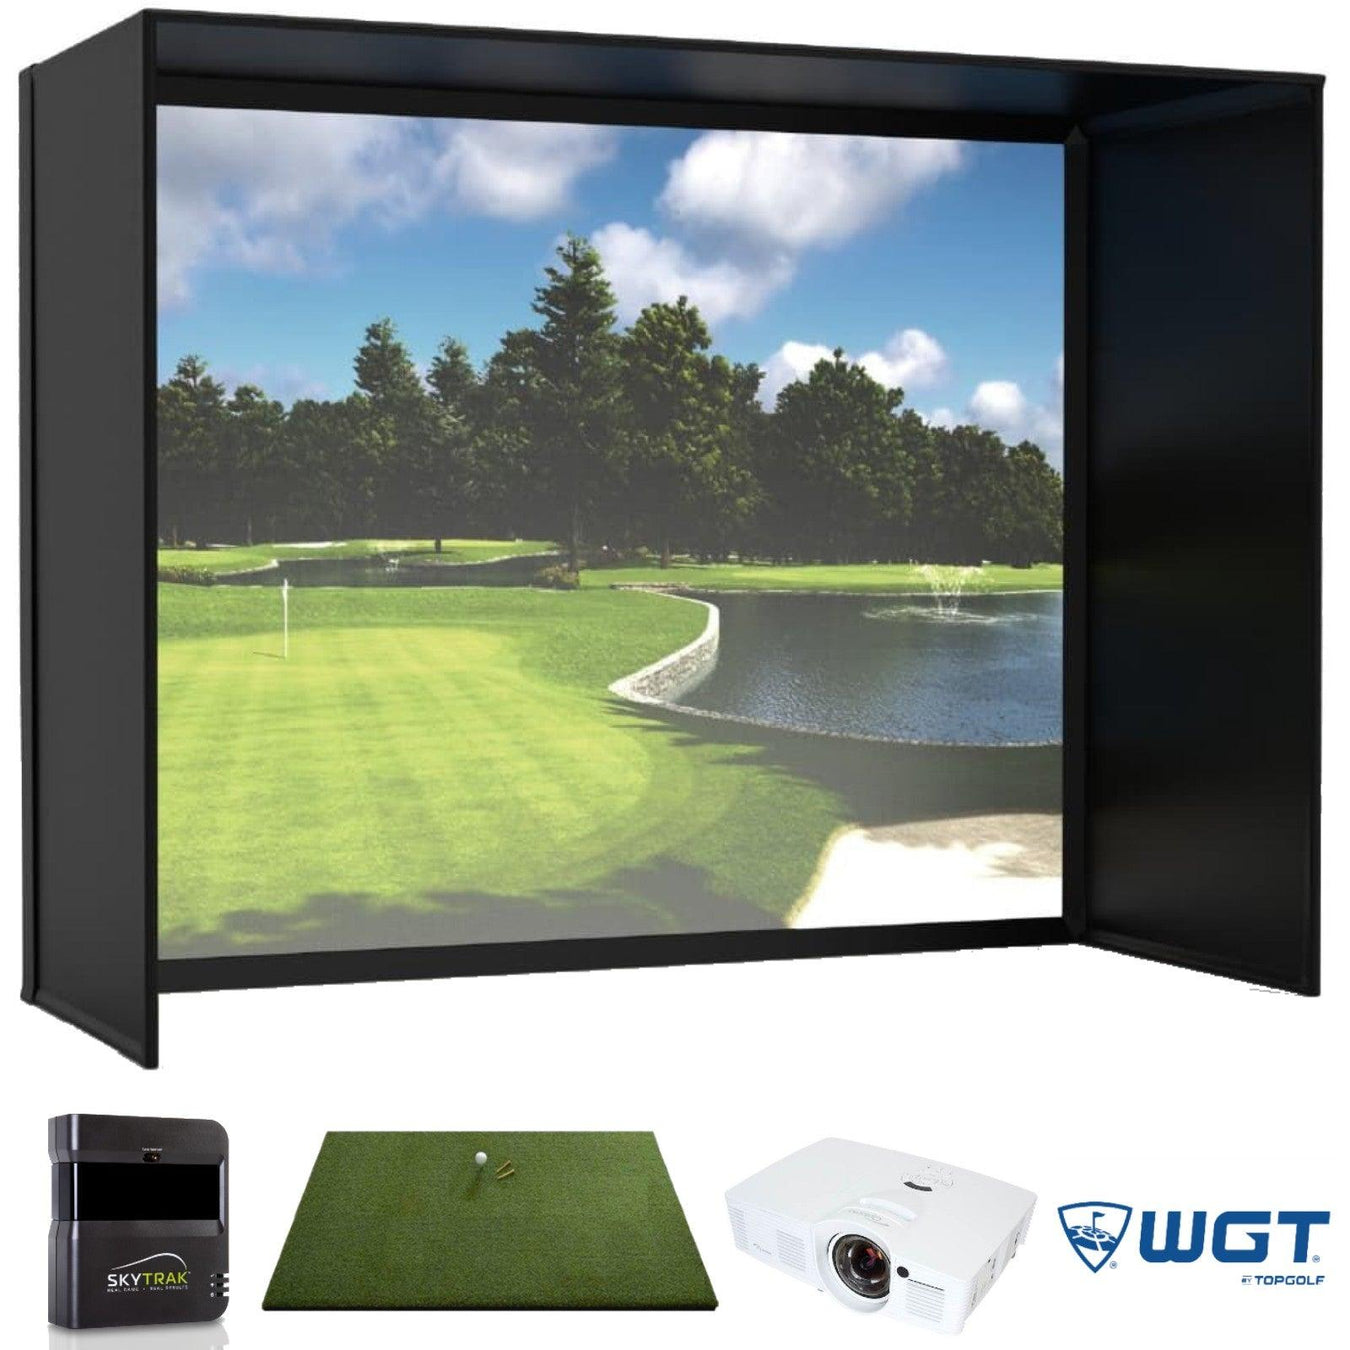 Golf Simulator Packages